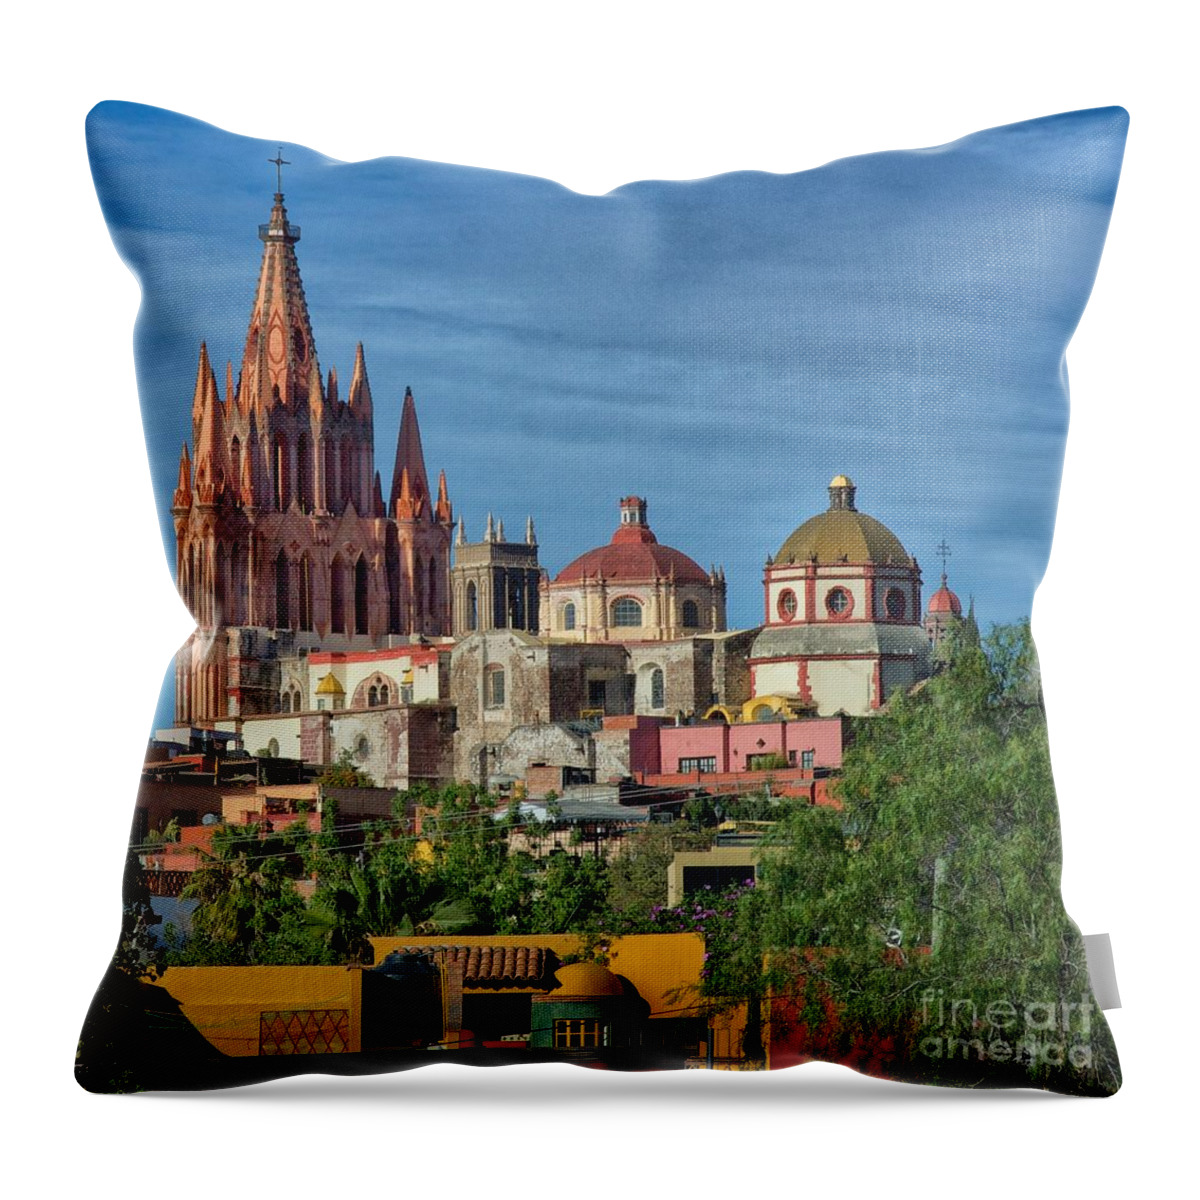 Church Throw Pillow featuring the photograph Parroquia #1 by Nicola Fiscarelli